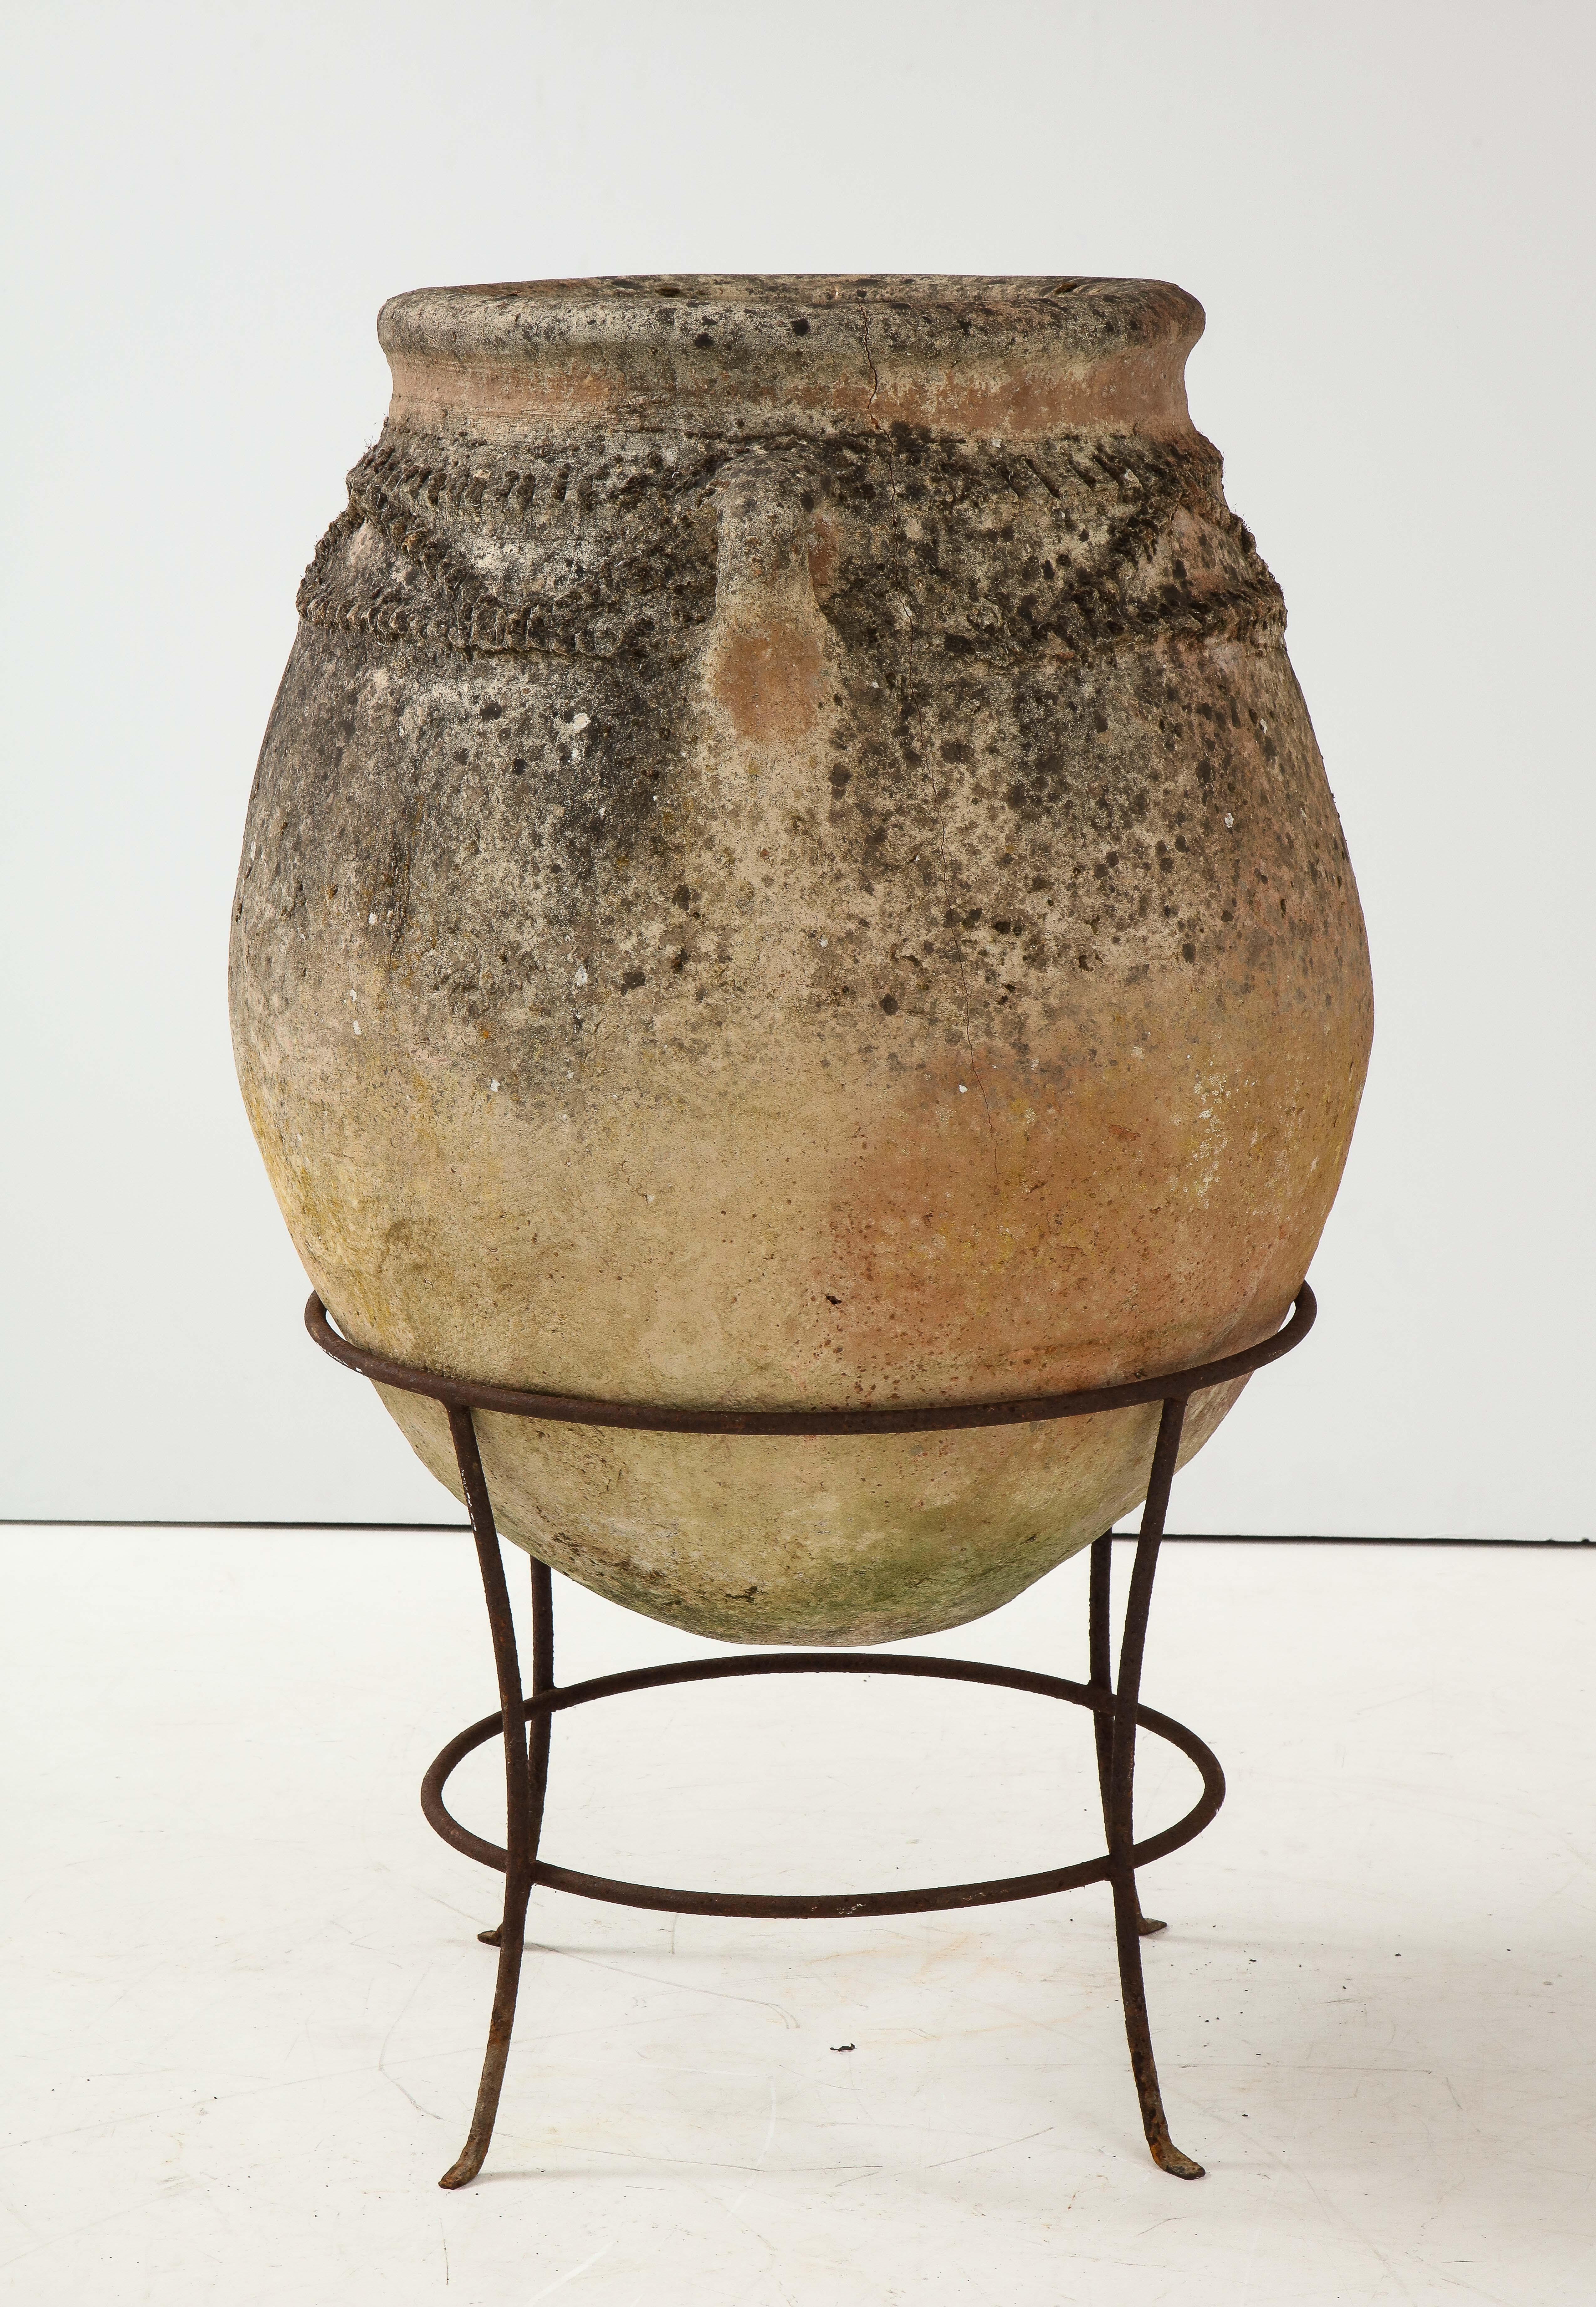 An Italian antique terracotta olive oil jar, of very grand scale and mounted within its original iron stand. The jar has moss and beautifully aged patina with two handles and horizonal cross hatch design. A beautiful, organic and dramatic piece for